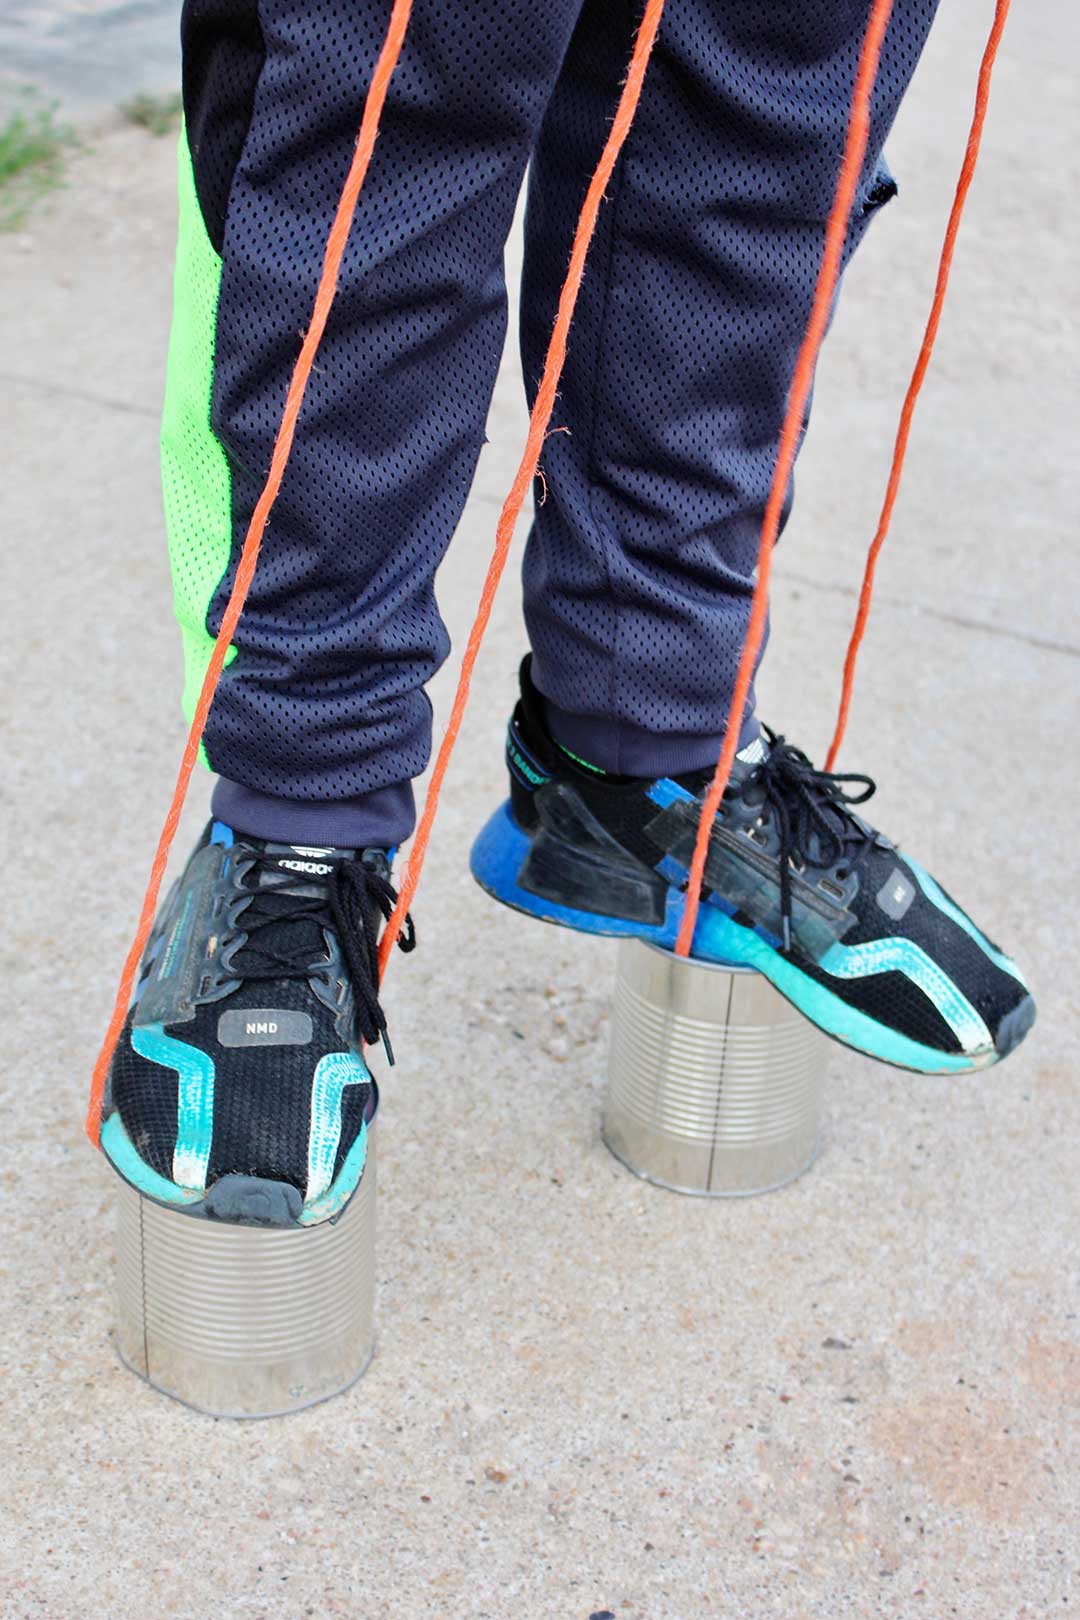 A child in tennis shoes stepping on recycled tin can stilts.